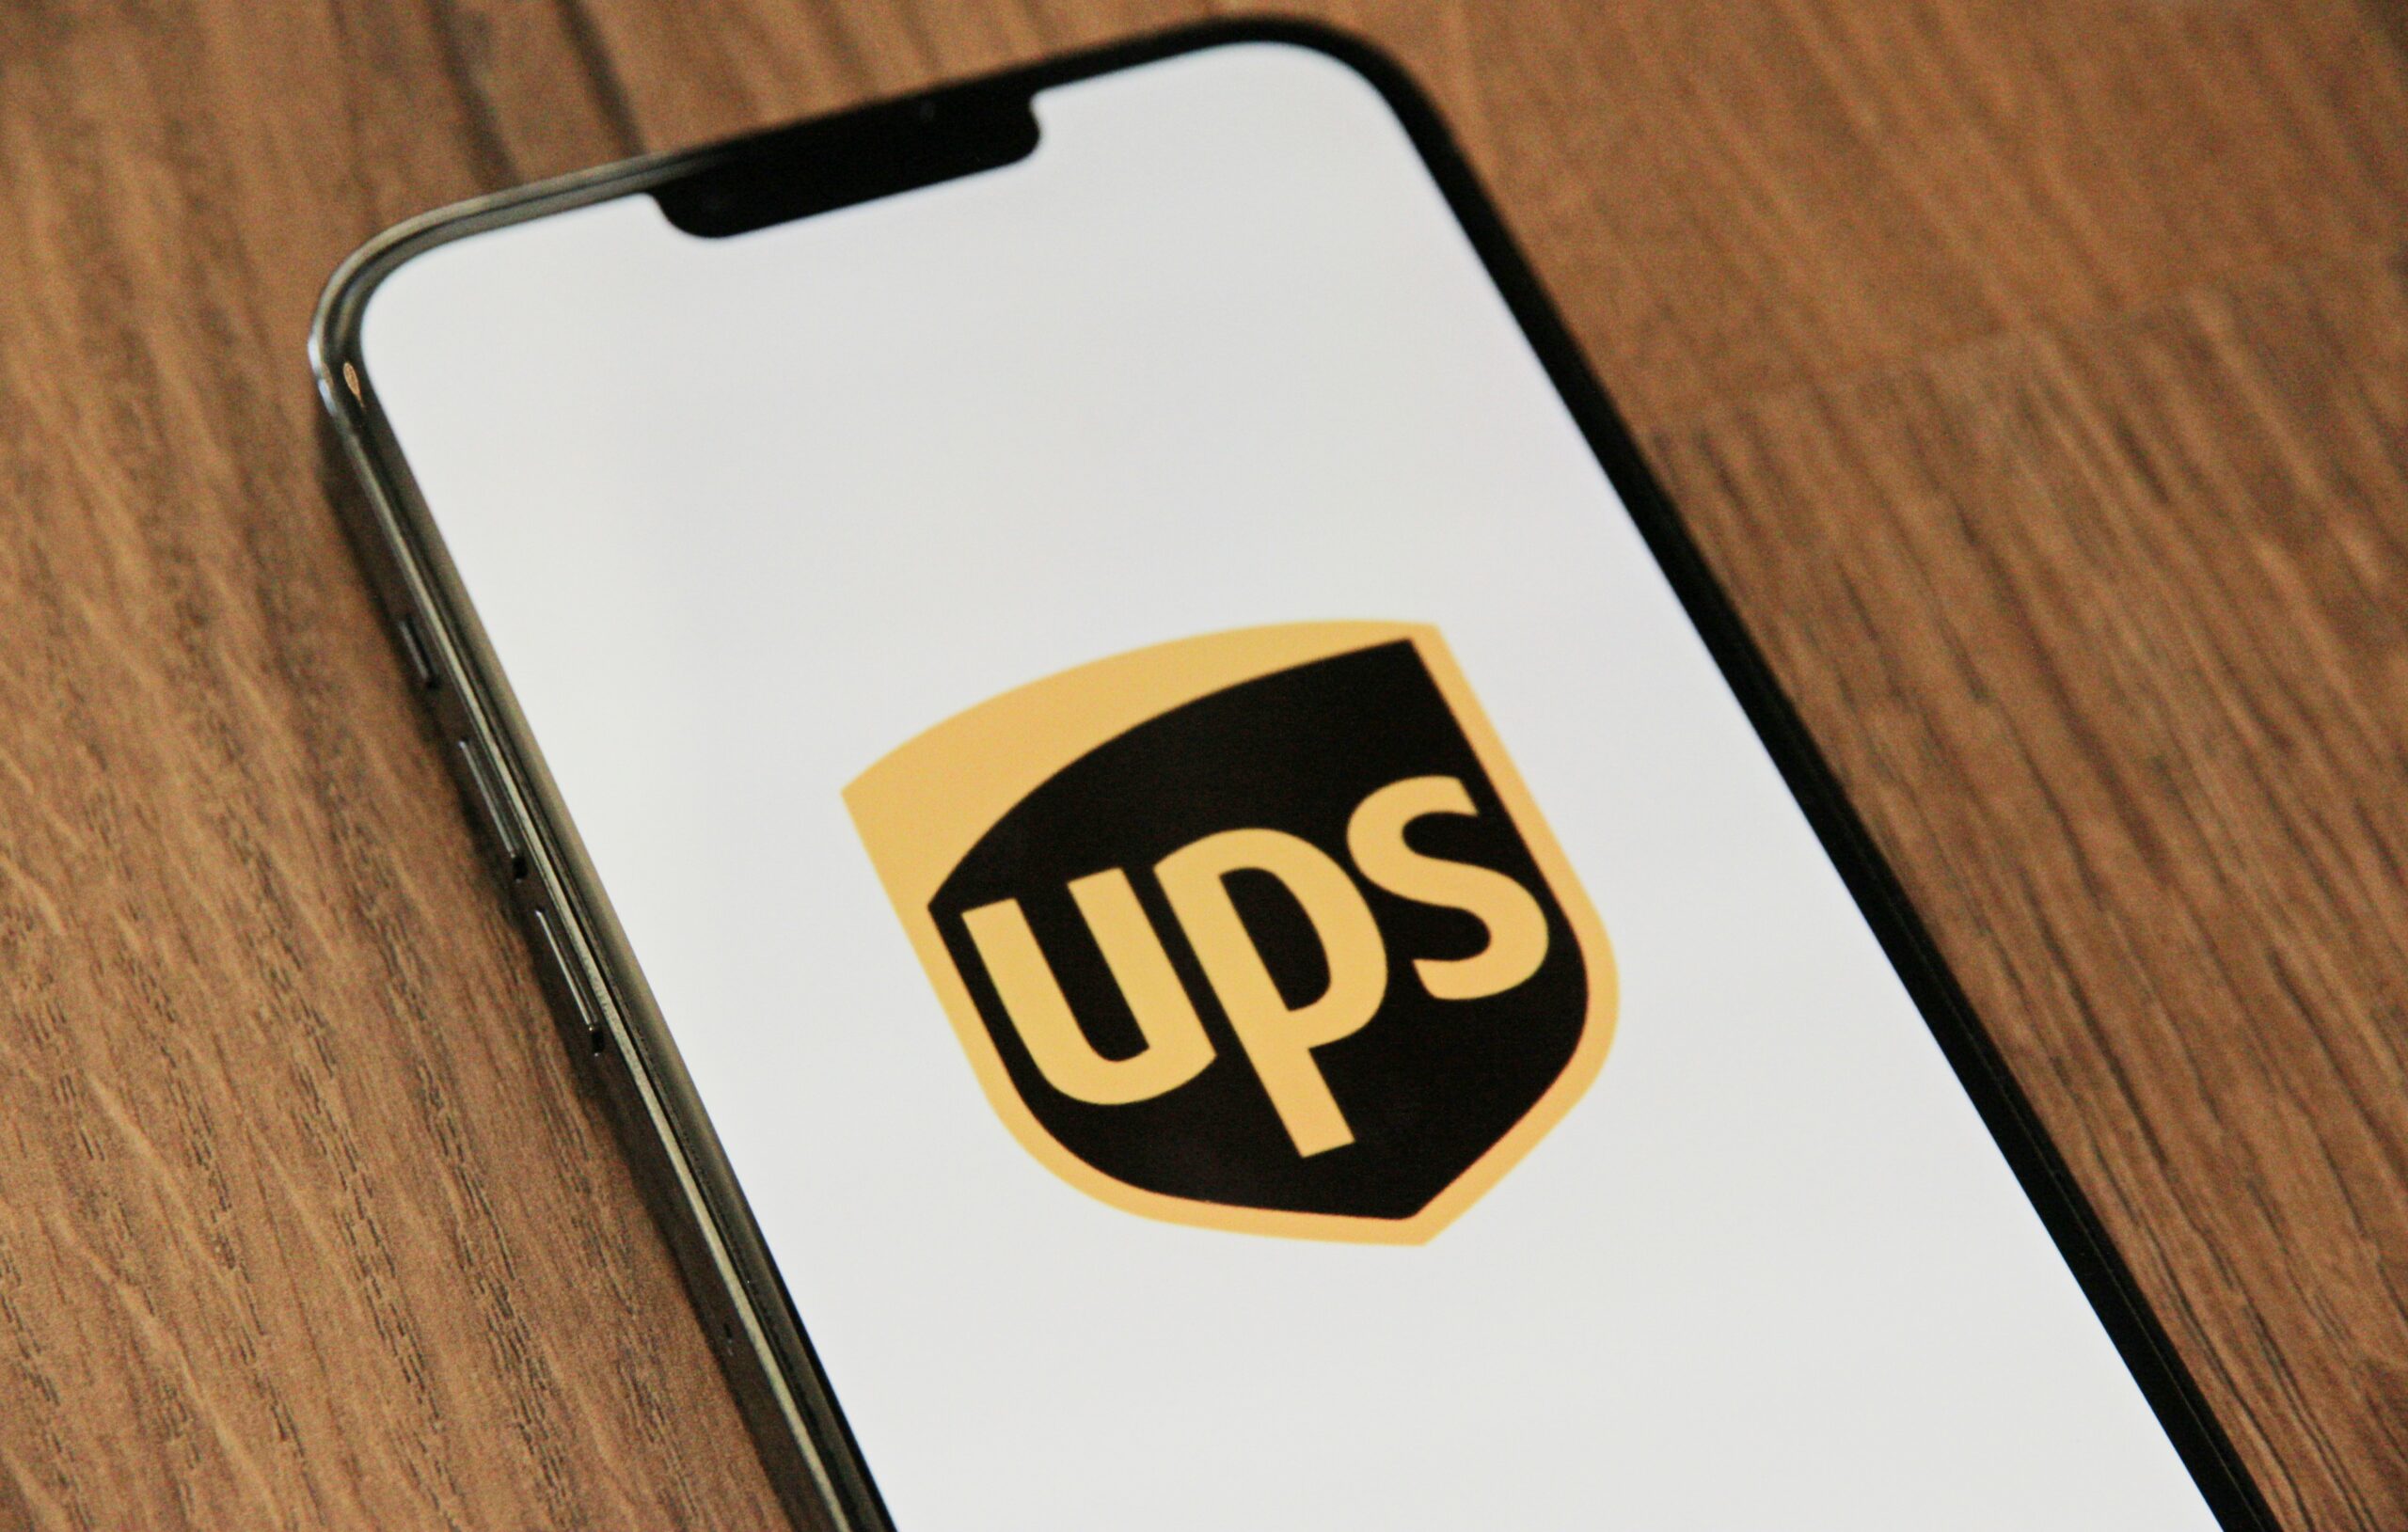 smartphone displaying the UPS logo on its screen